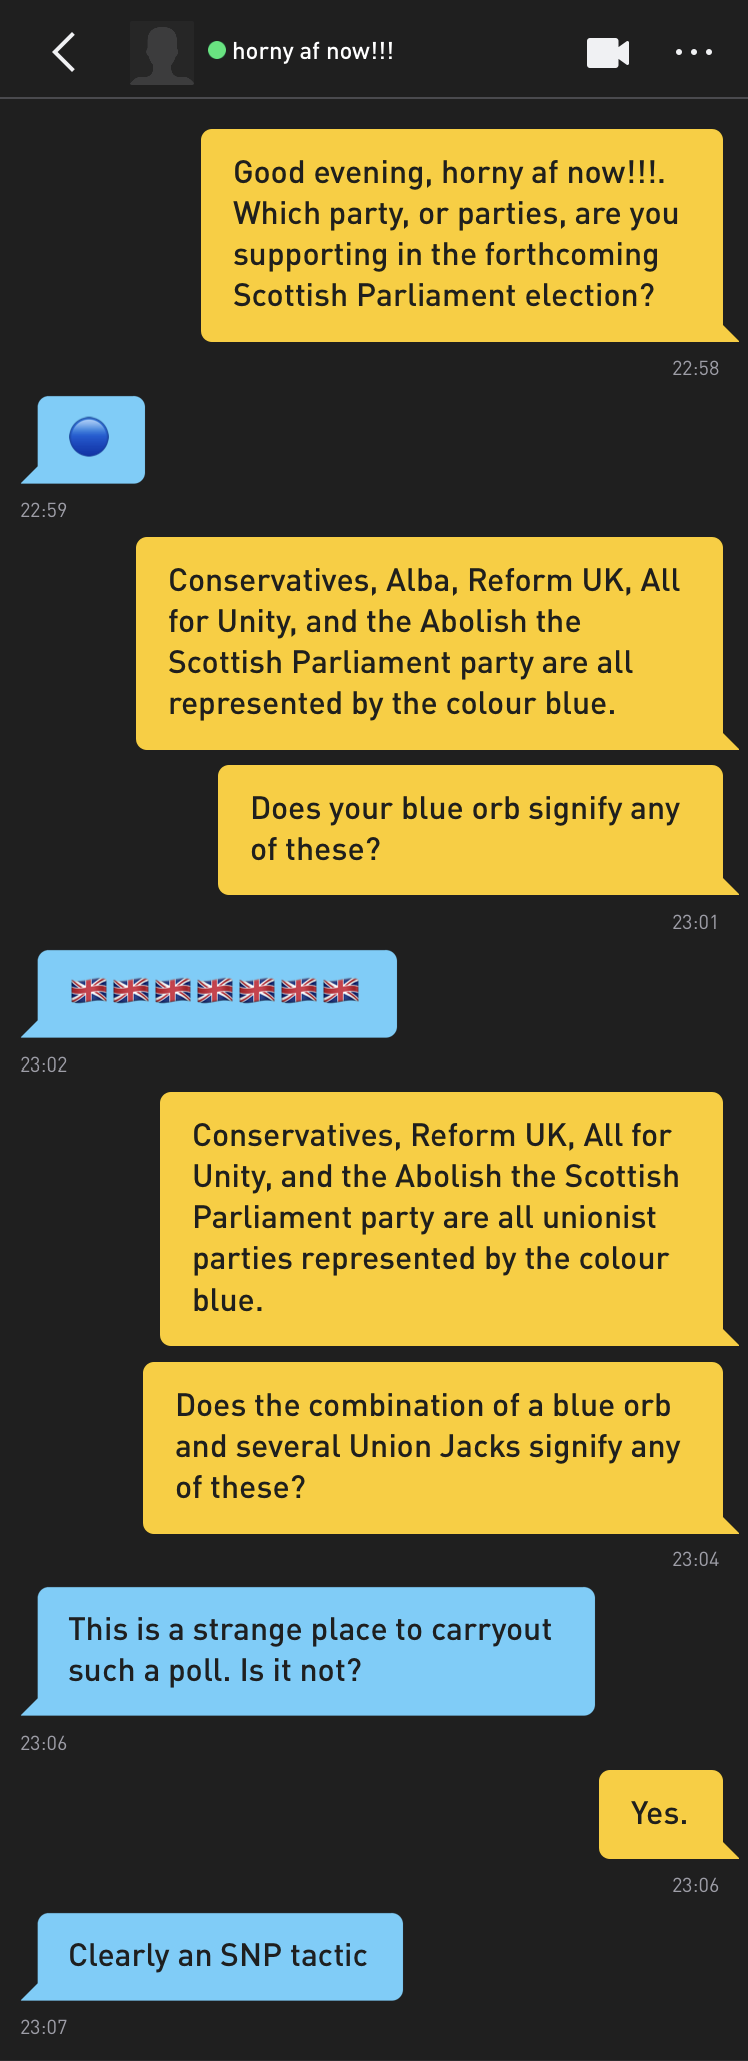 Me: Good evening, horny af now!!!. Which party, or parties, are you supporting in the forthcoming Scottish Parliament election? horny af now!!!: ? Me: Conservatives, Alba, Reform UK, All for Unity, and the Abolish the Scottish Parliament party are all represented by the colour blue. Me: Does your blue orb signify any of these? horny af now!!!: ?????????????? Me: Conservatives, Reform UK, All for Unity, and the Abolish the Scottish Parliament party are all unionist parties represented by the colour blue. Me: Does the combination of a blue orb and several Union Jacks signify any of these? horny af now!!!: This is a strange place to carryout such a poll. Is it not? Me: Yes. horny af now!!!: Clearly an SNP tactic